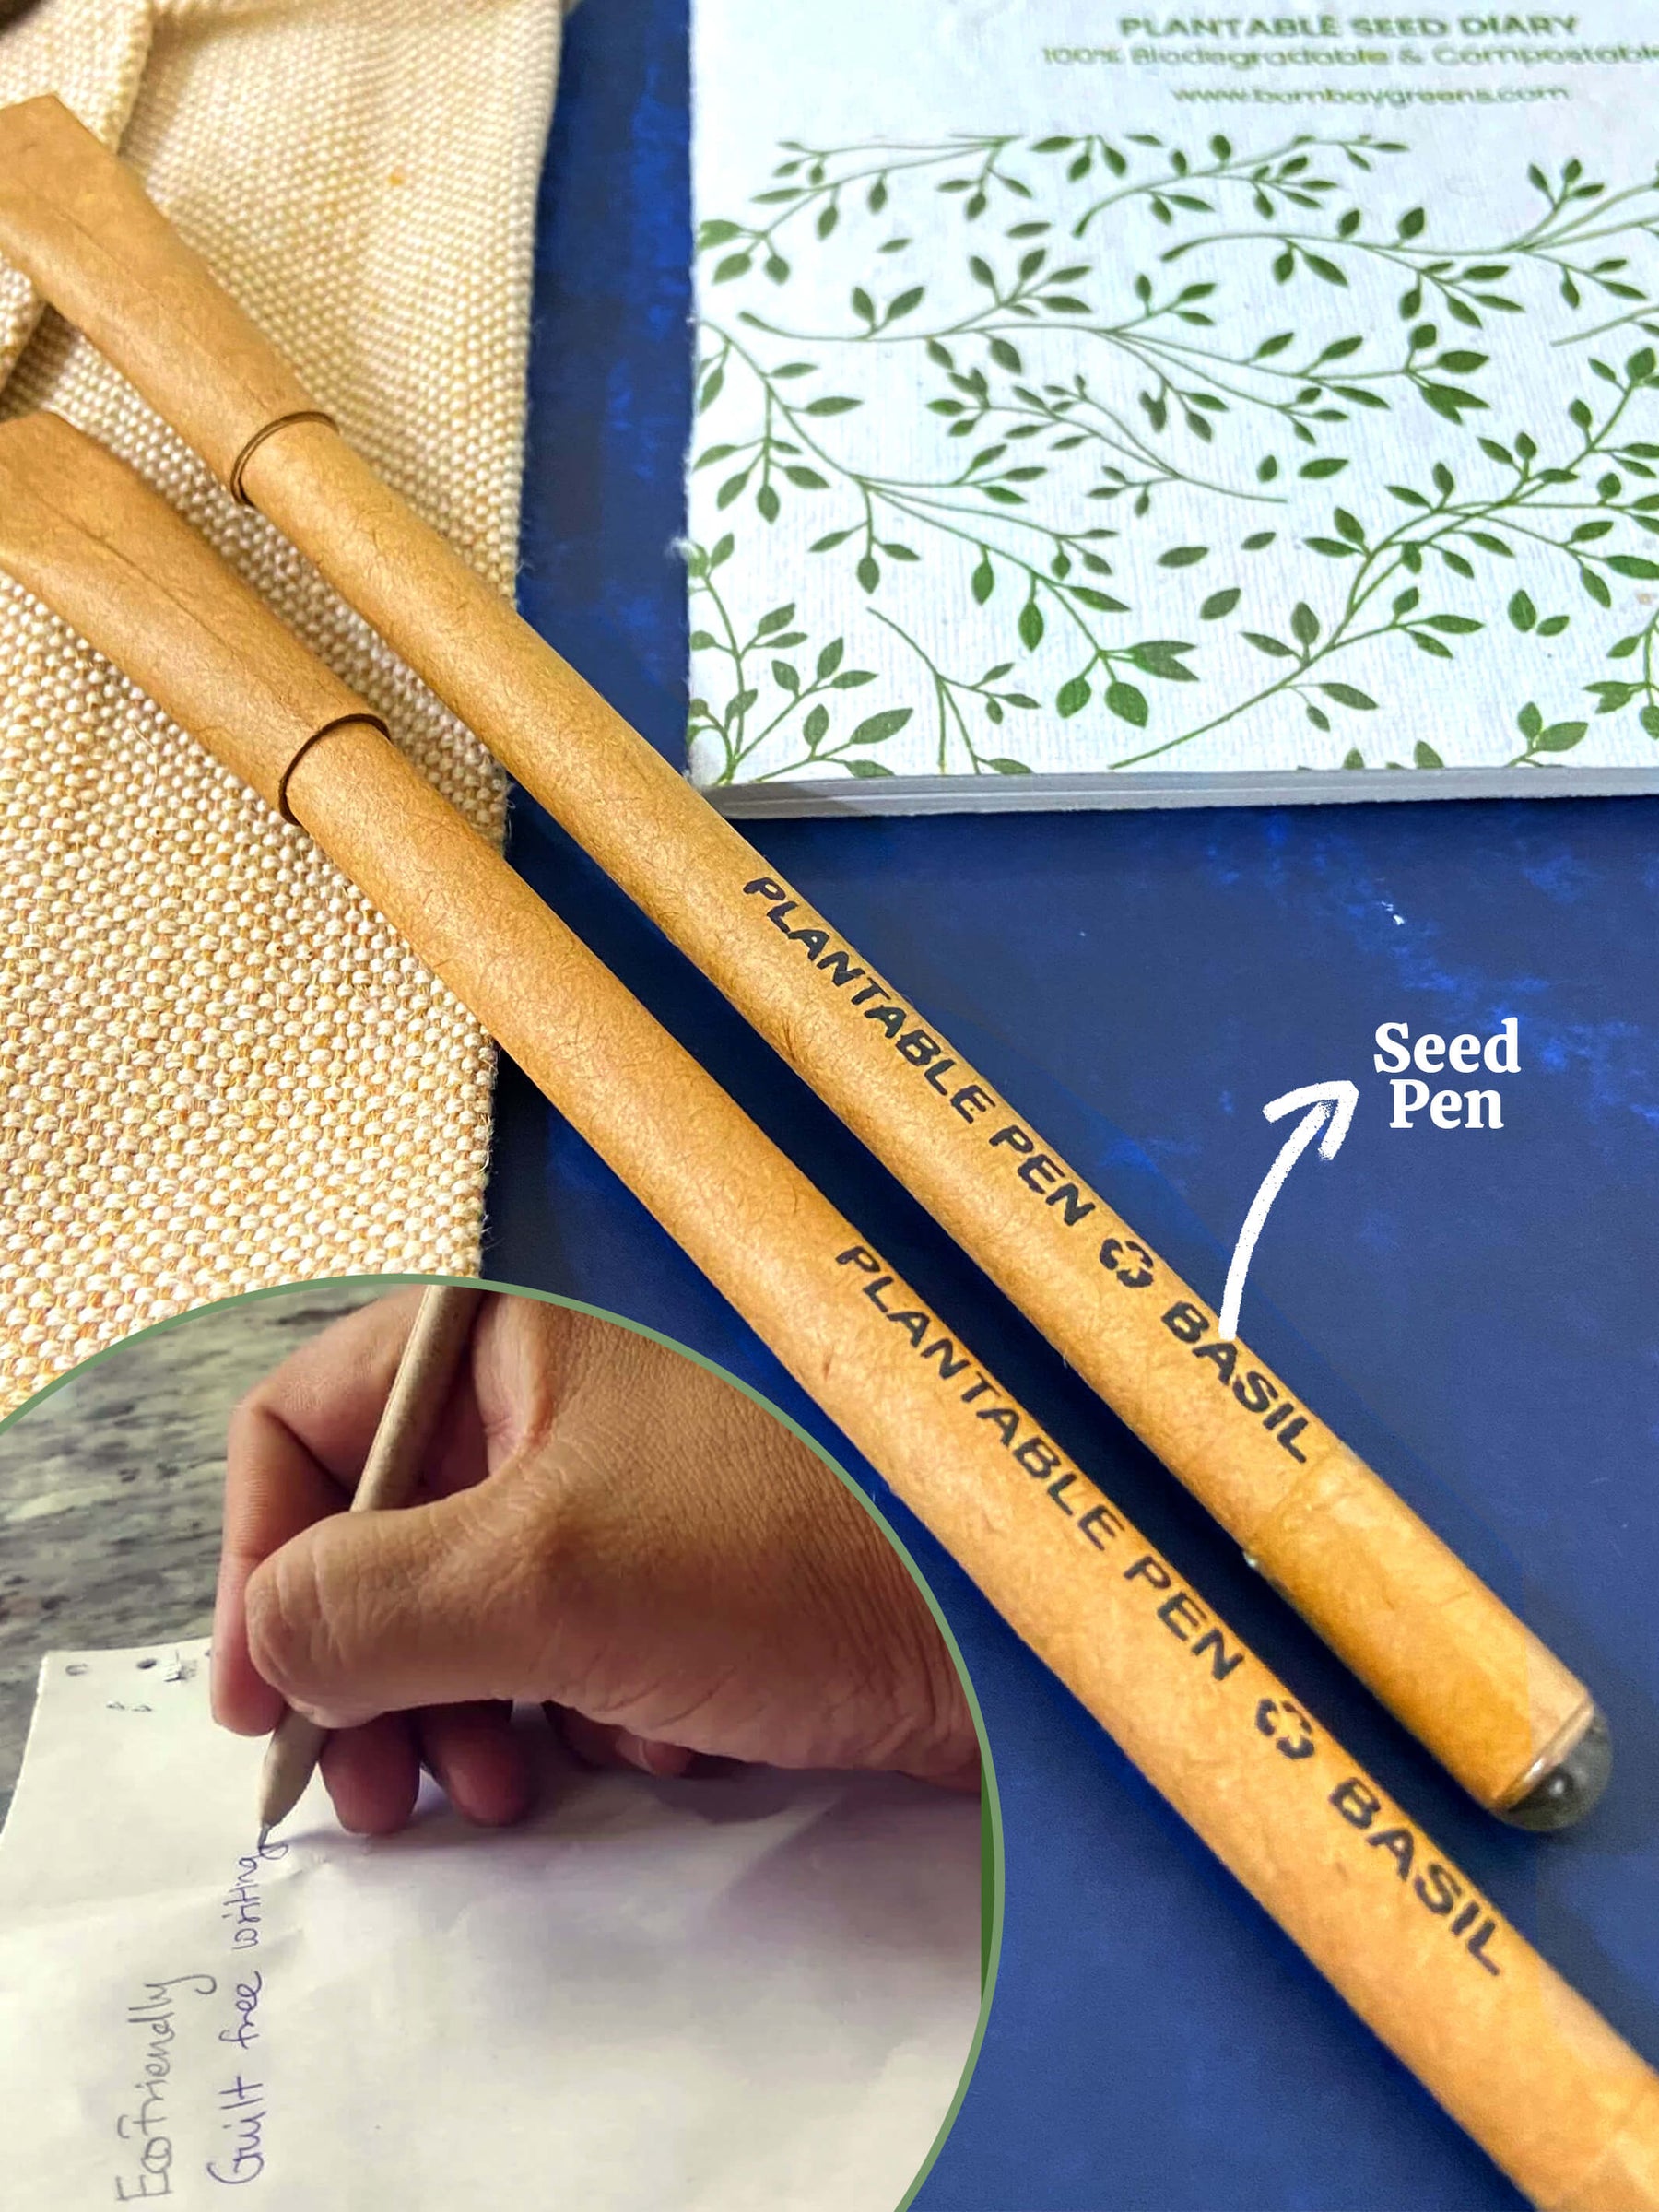 Plantable Stationery - Canvas Pouch, Seed Pen & Pencil